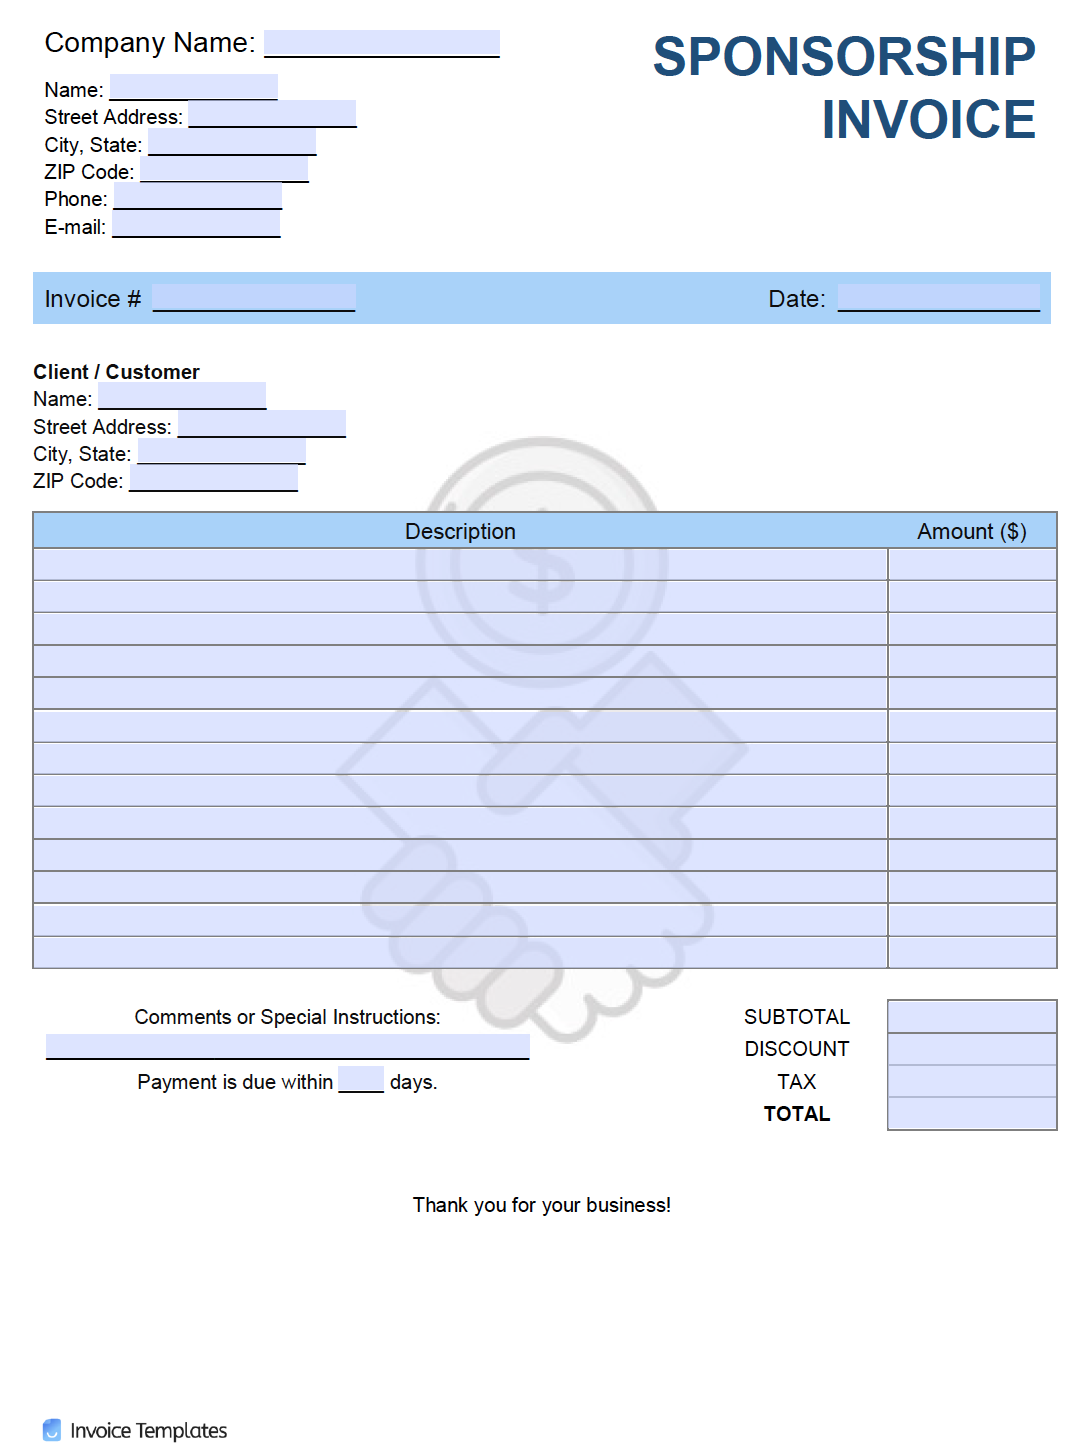 Free Sponsorship Invoice Template  PDF  WORD  EXCEL Intended For Blank Sponsor Form Template Free